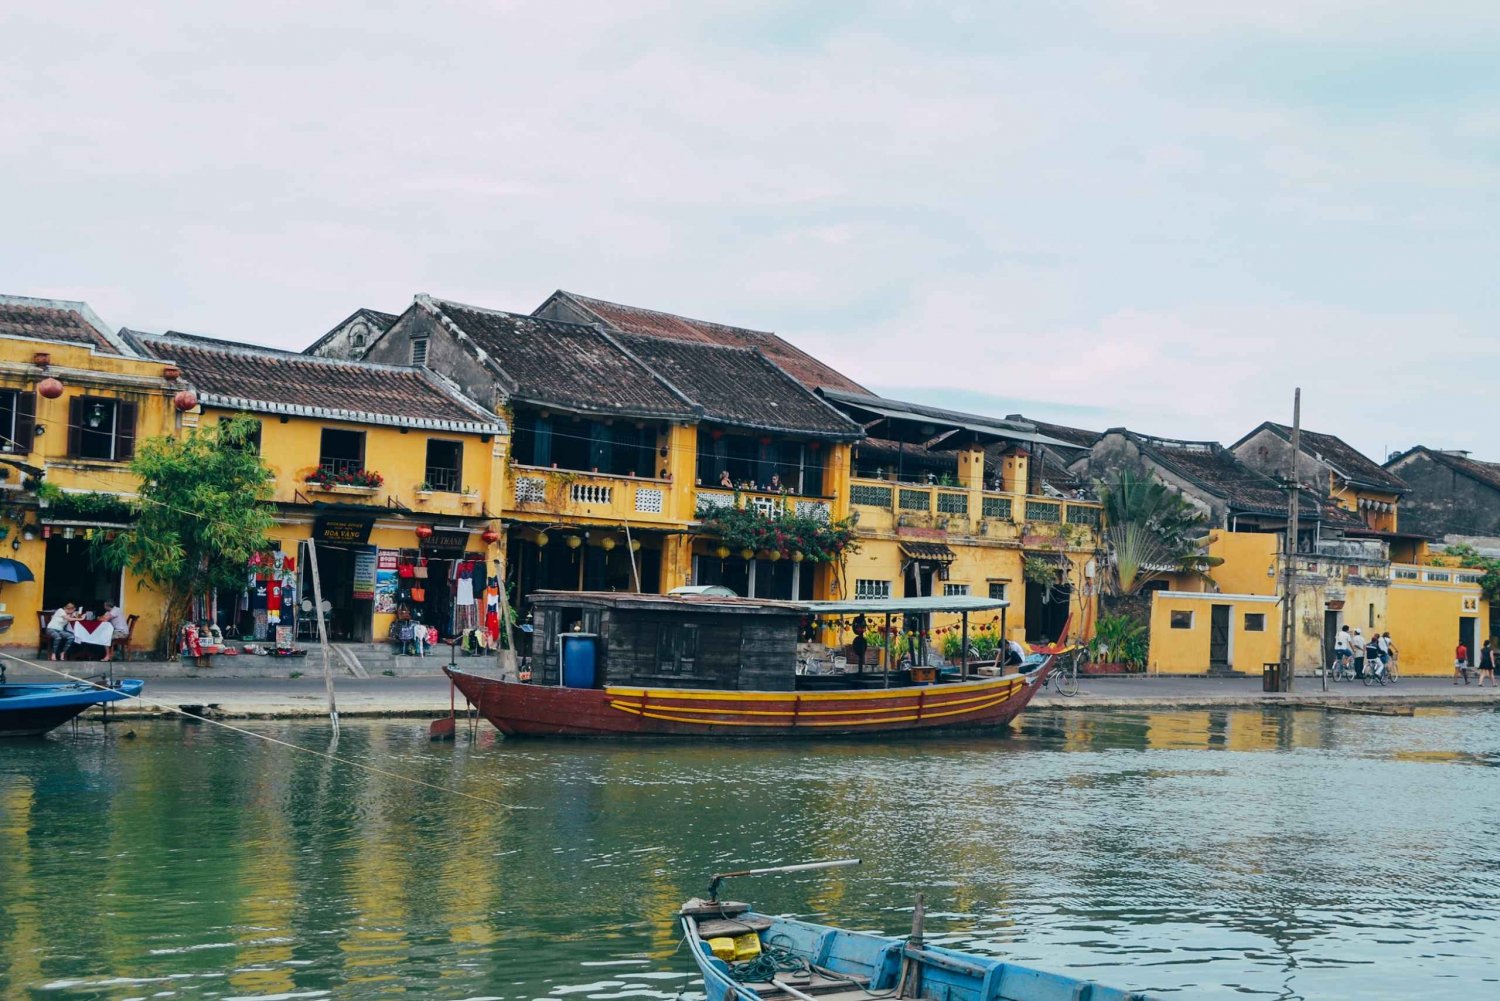 Explore Hoi An City With a Private Chauffeur